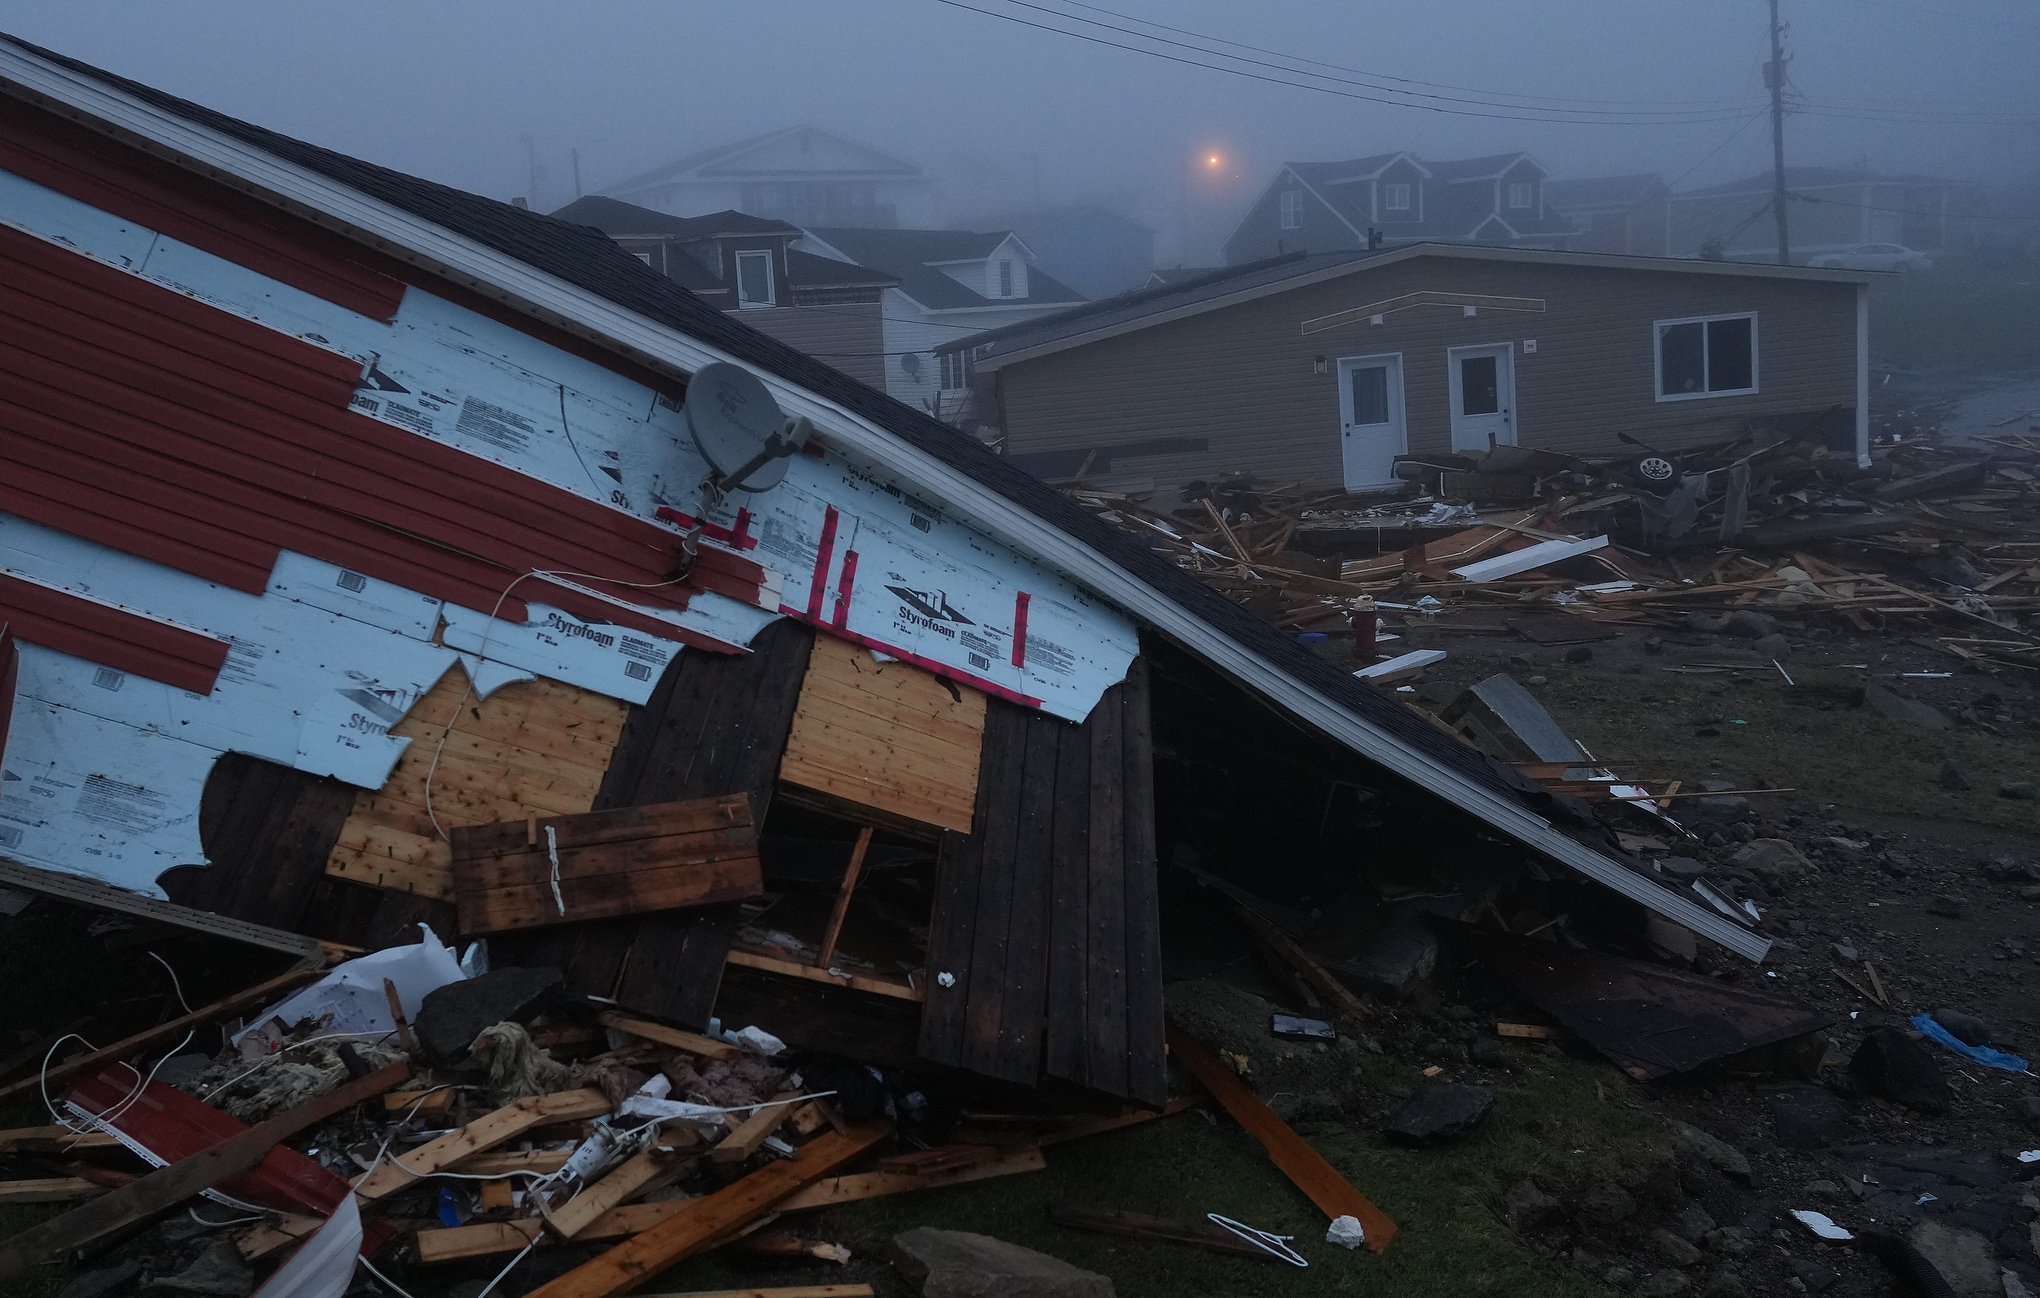 Hurricane Fiona aftermath in Port aux basques, Newfoundland